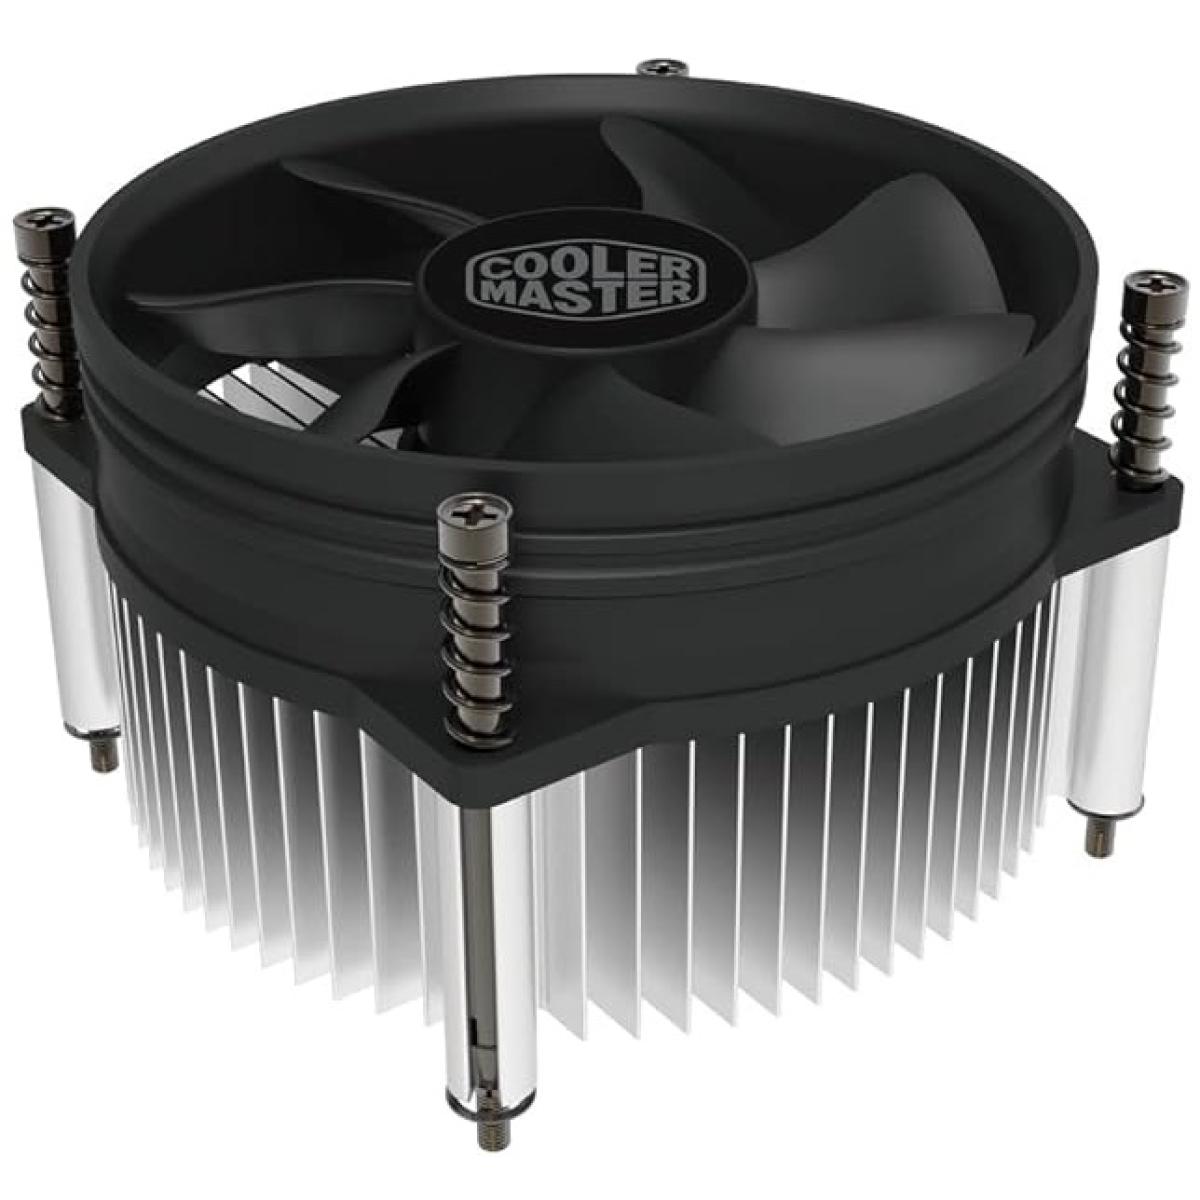 Cooler Master Standard Air Cooler I50 FOR LGA 1700, Intel 12th 13th 14th Gen Processors, 92mm diameter fan, Strong Airflow Low Noise